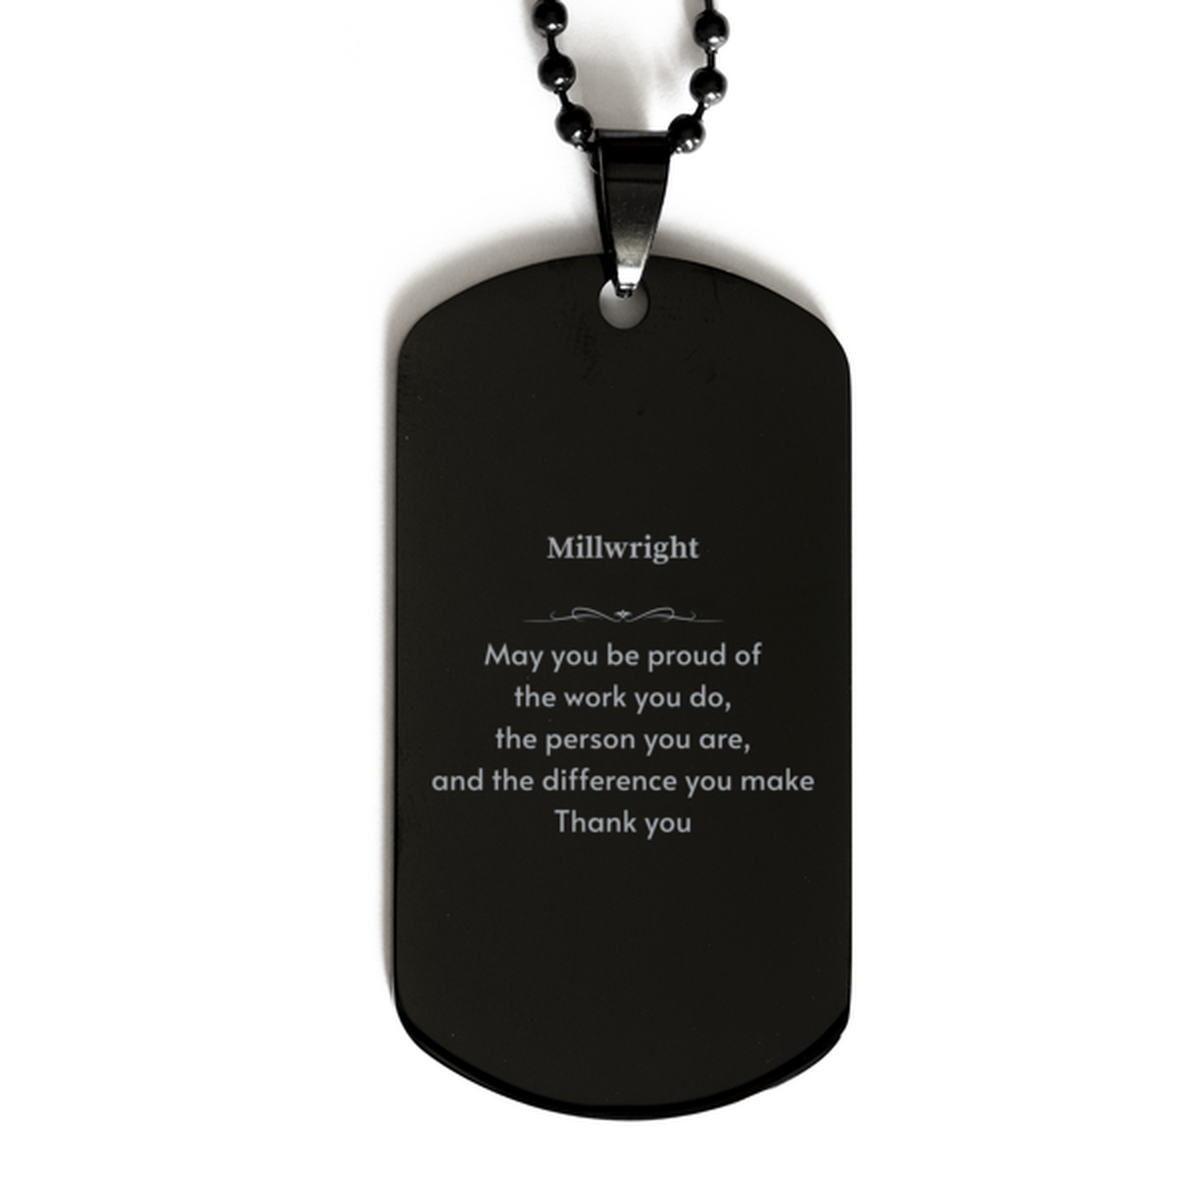 Heartwarming Black Dog Tag Retirement Coworkers Gifts for Millwright, Millwright May You be proud of the work you do, the person you are Gifts for Boss Men Women Friends